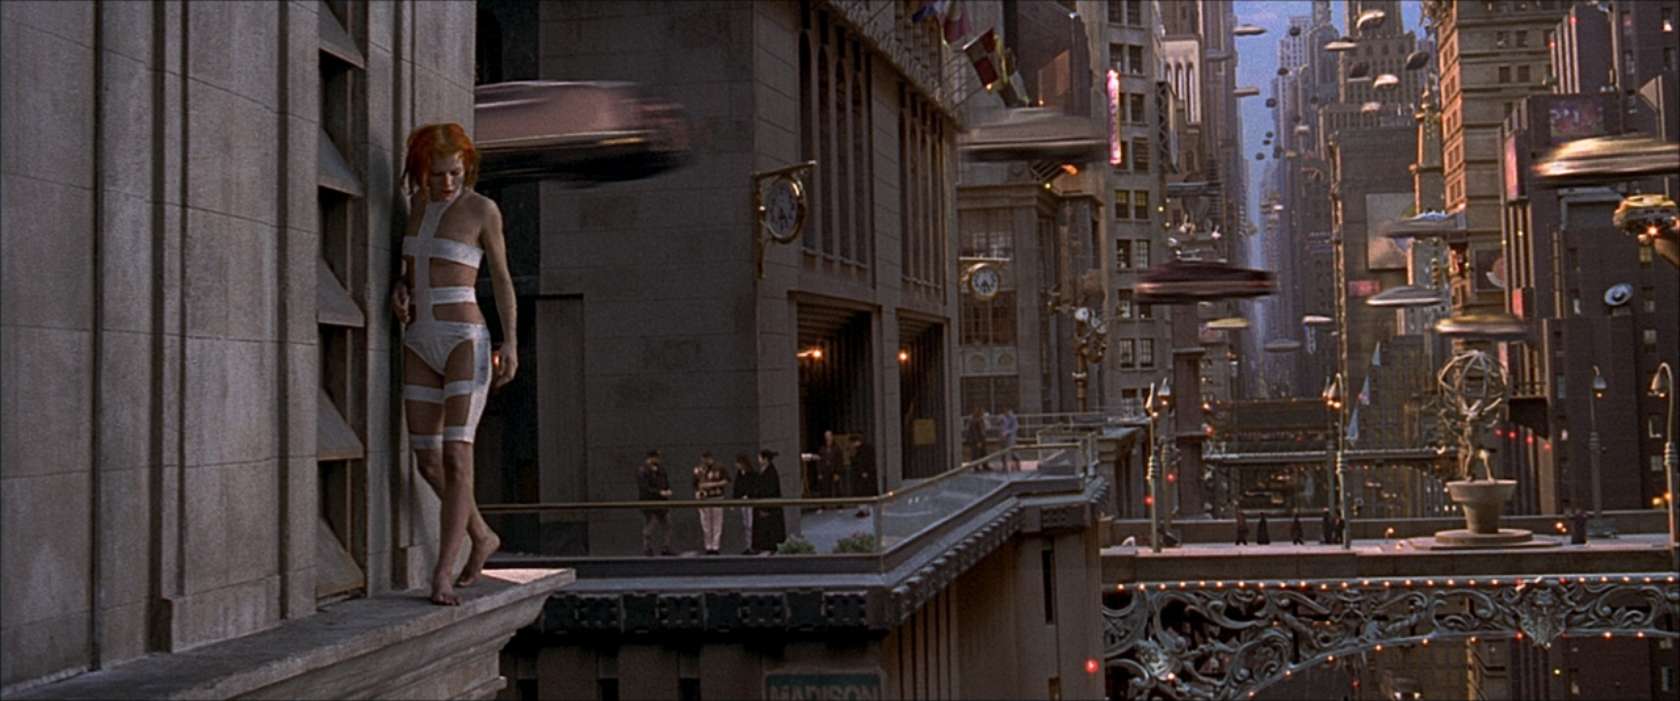 A Brief History Of Modern Architecture Through Movies